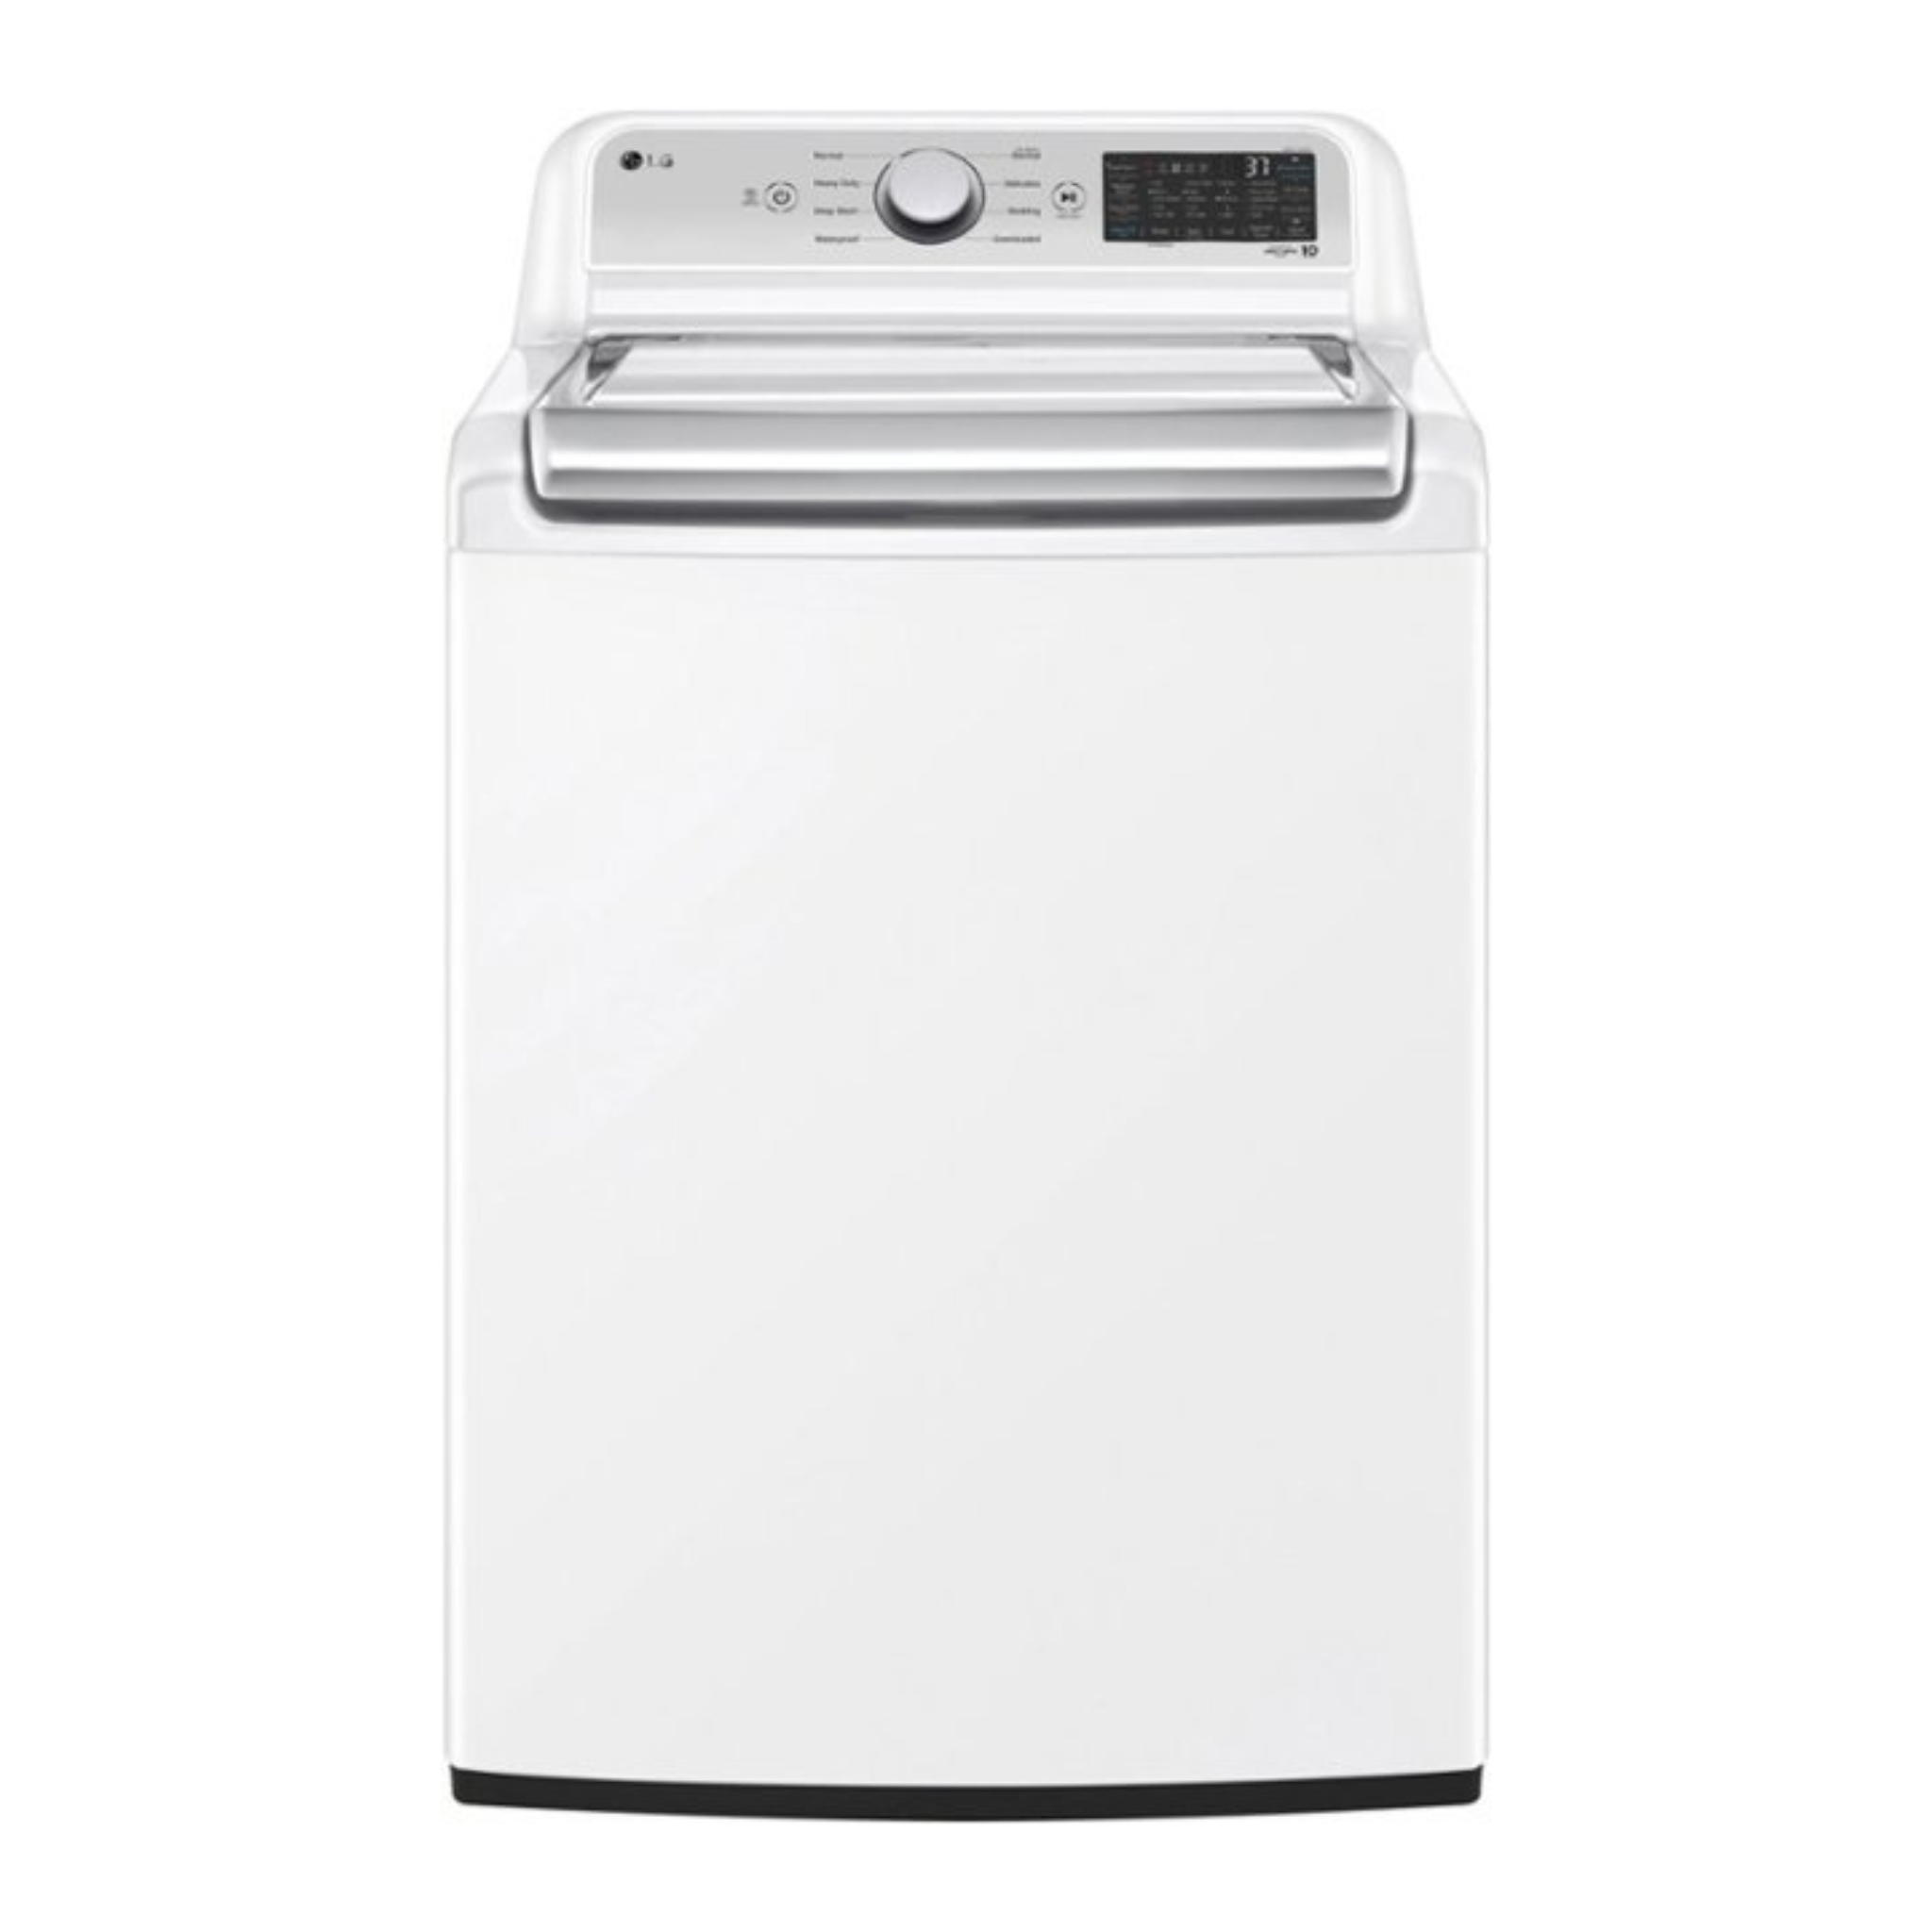 Get Up To 50% Off Various Washers and Dryers